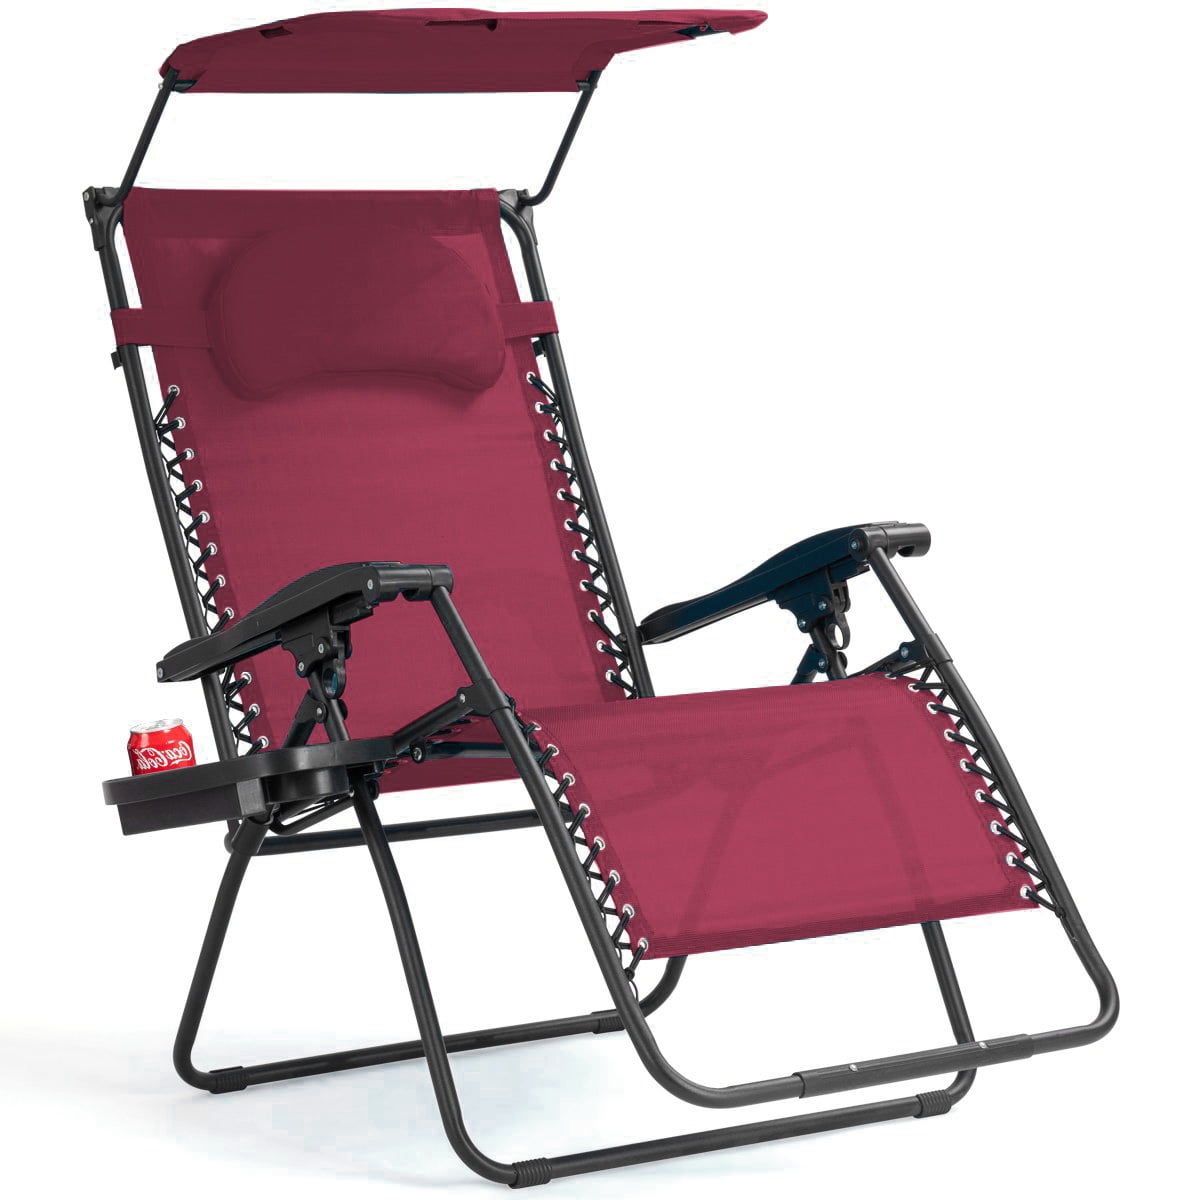 chair with sun shade